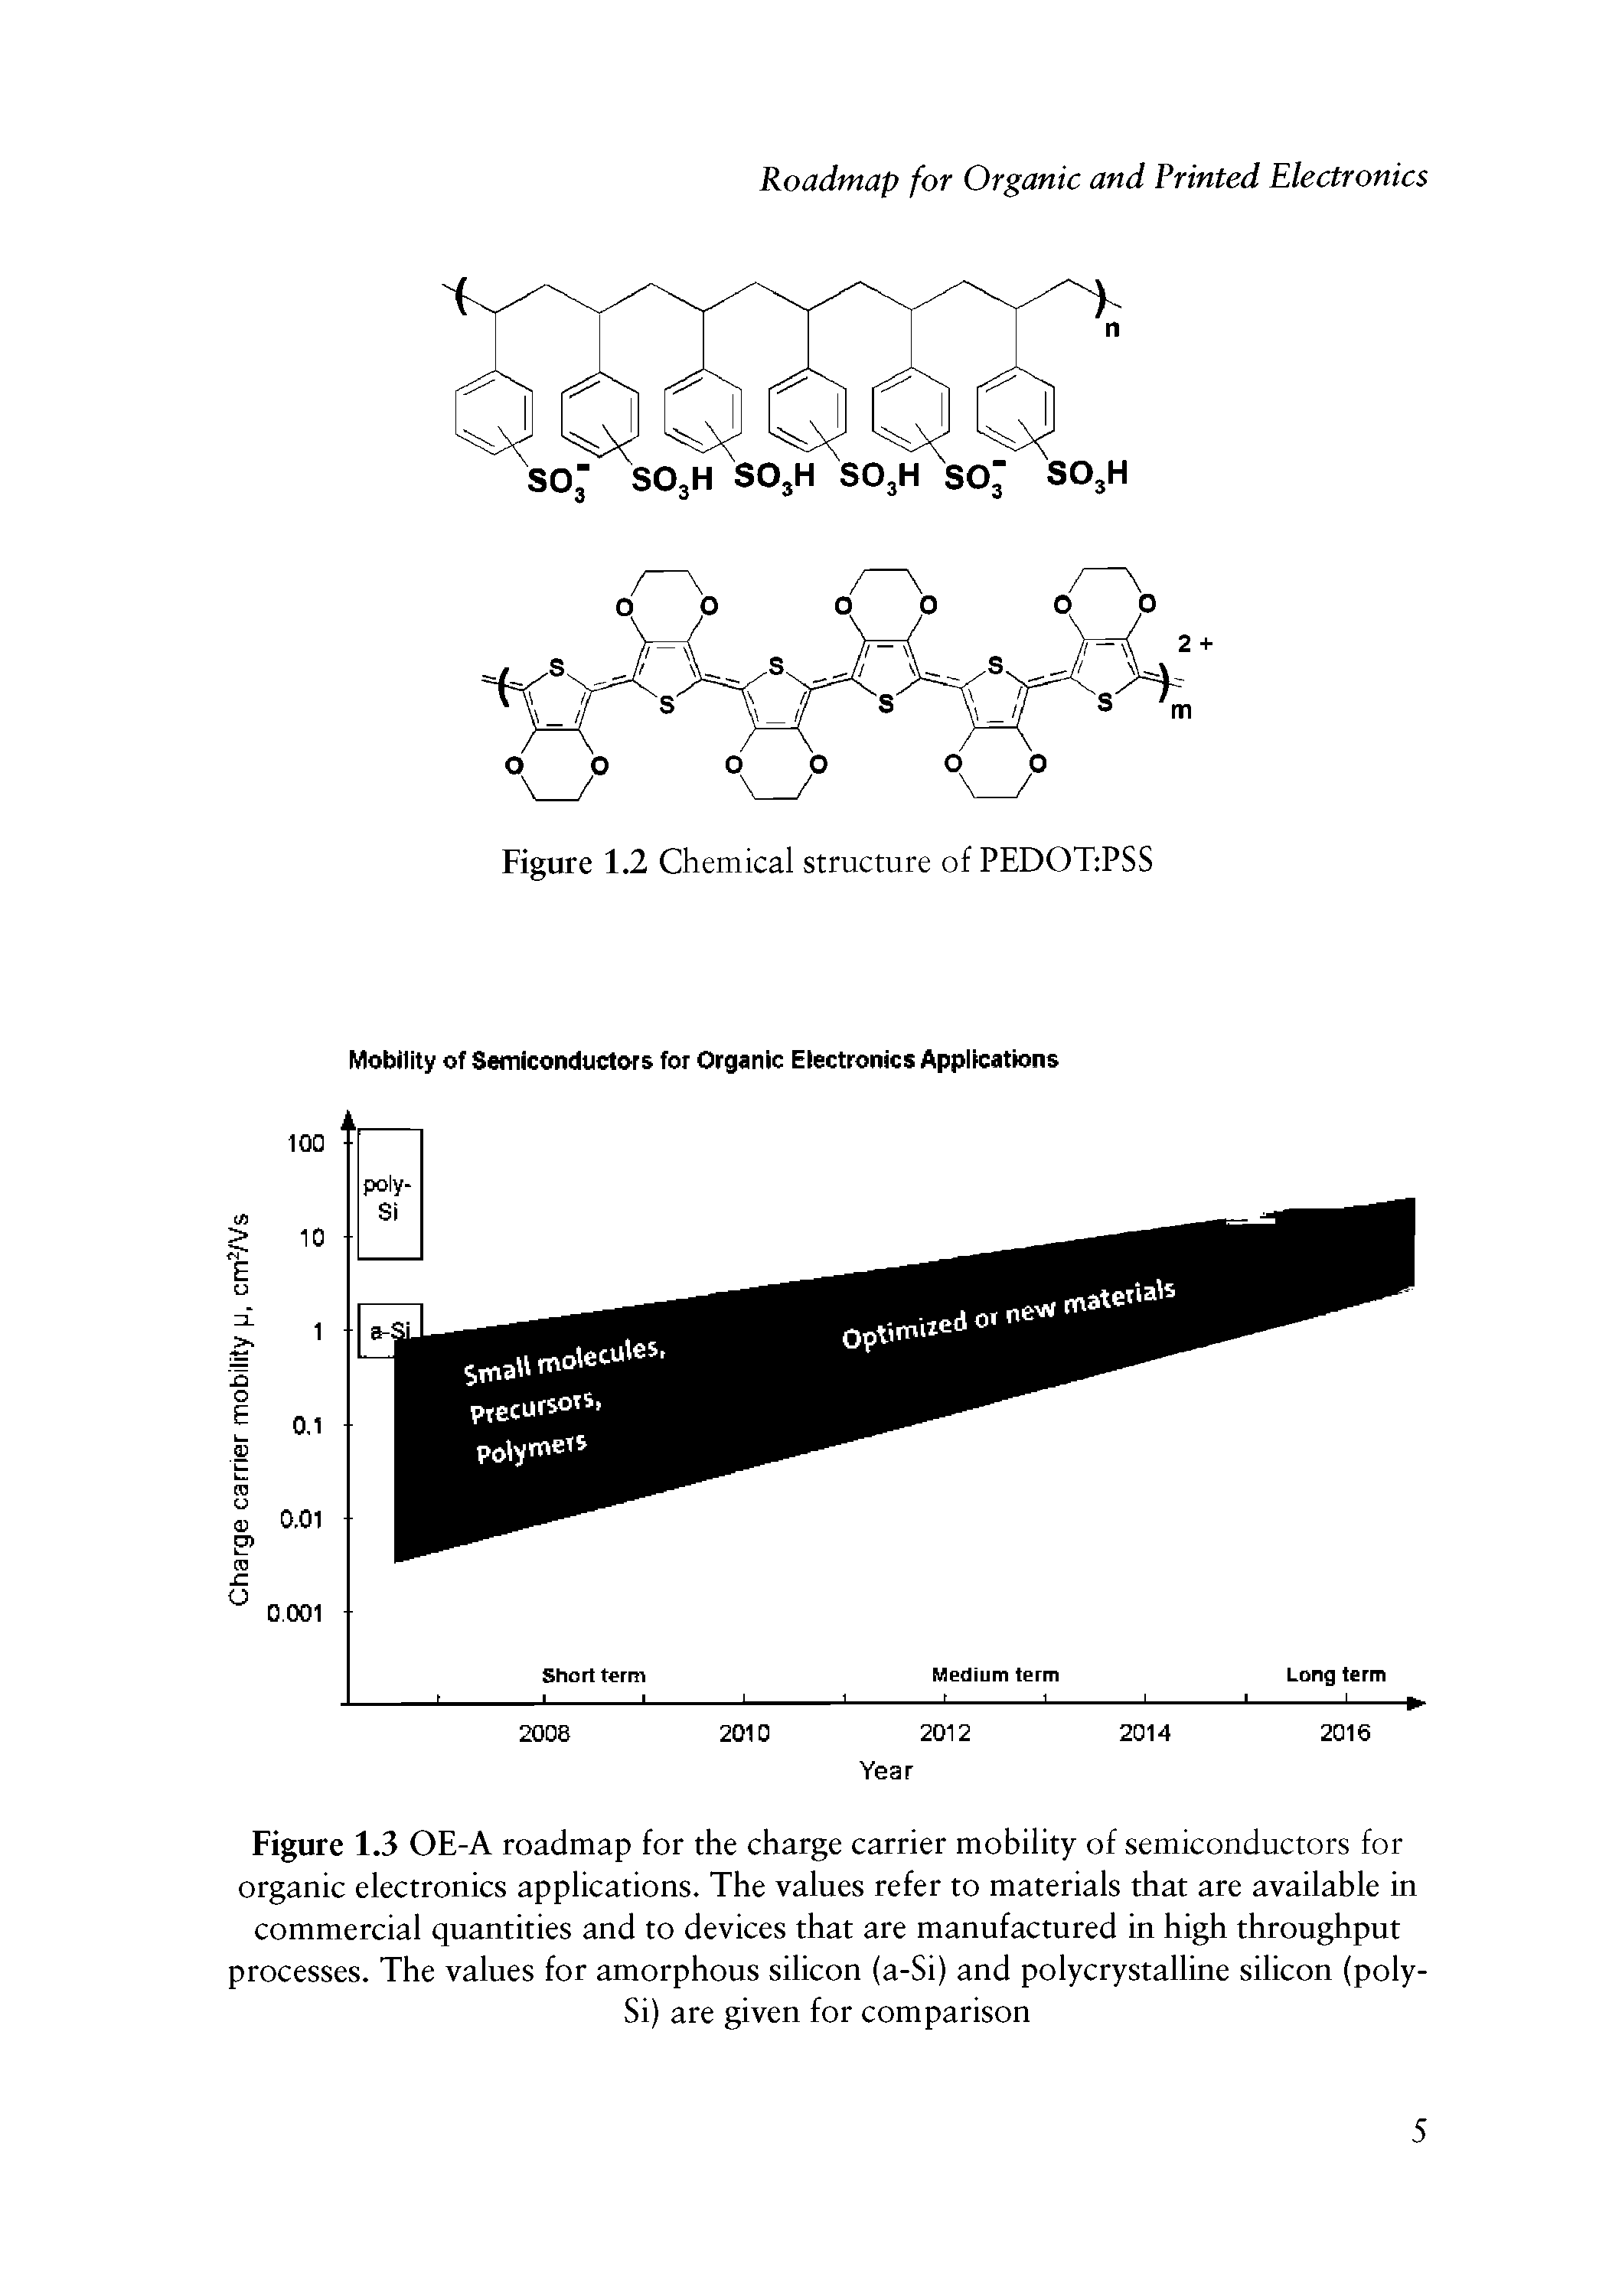 Figure 1.3 OE-A roadmap for the charge carrier mobility of semiconductors for organic electronics applications. The values refer to materials that are available in commercial quantities and to devices that are manufactured in high throughput processes. The values for amorphous silicon (a-Si) and polycrystalline silicon (poly-...